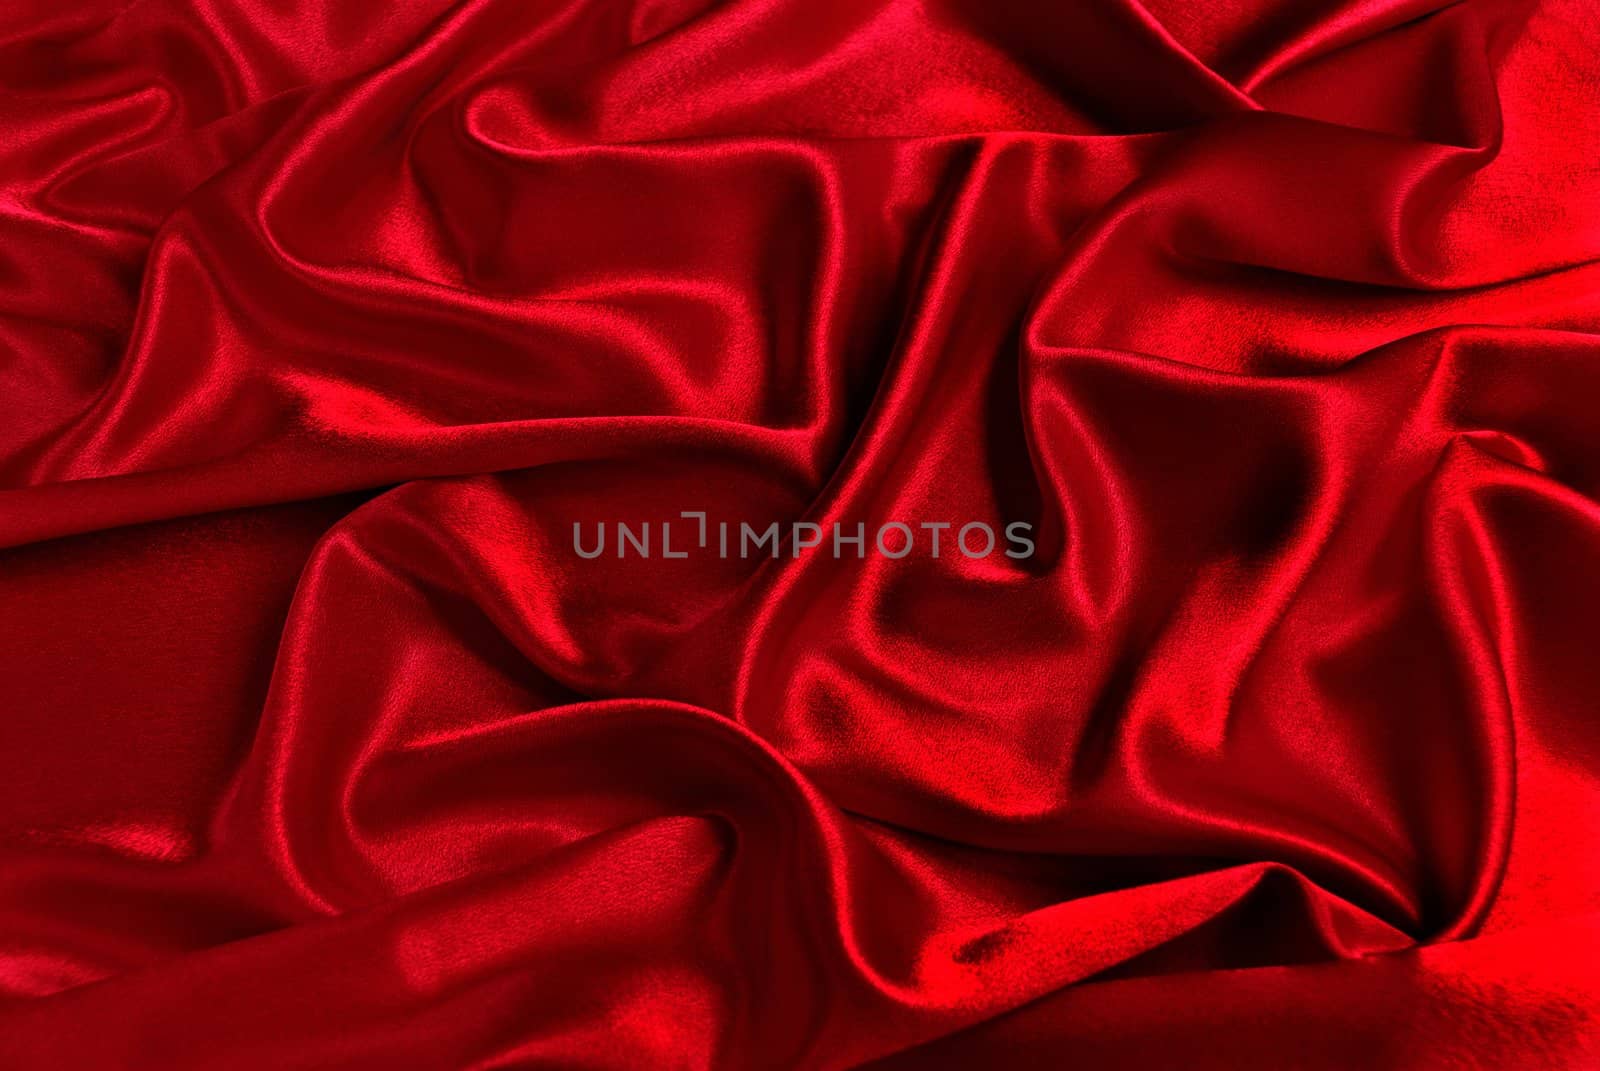 Red satin with a folds